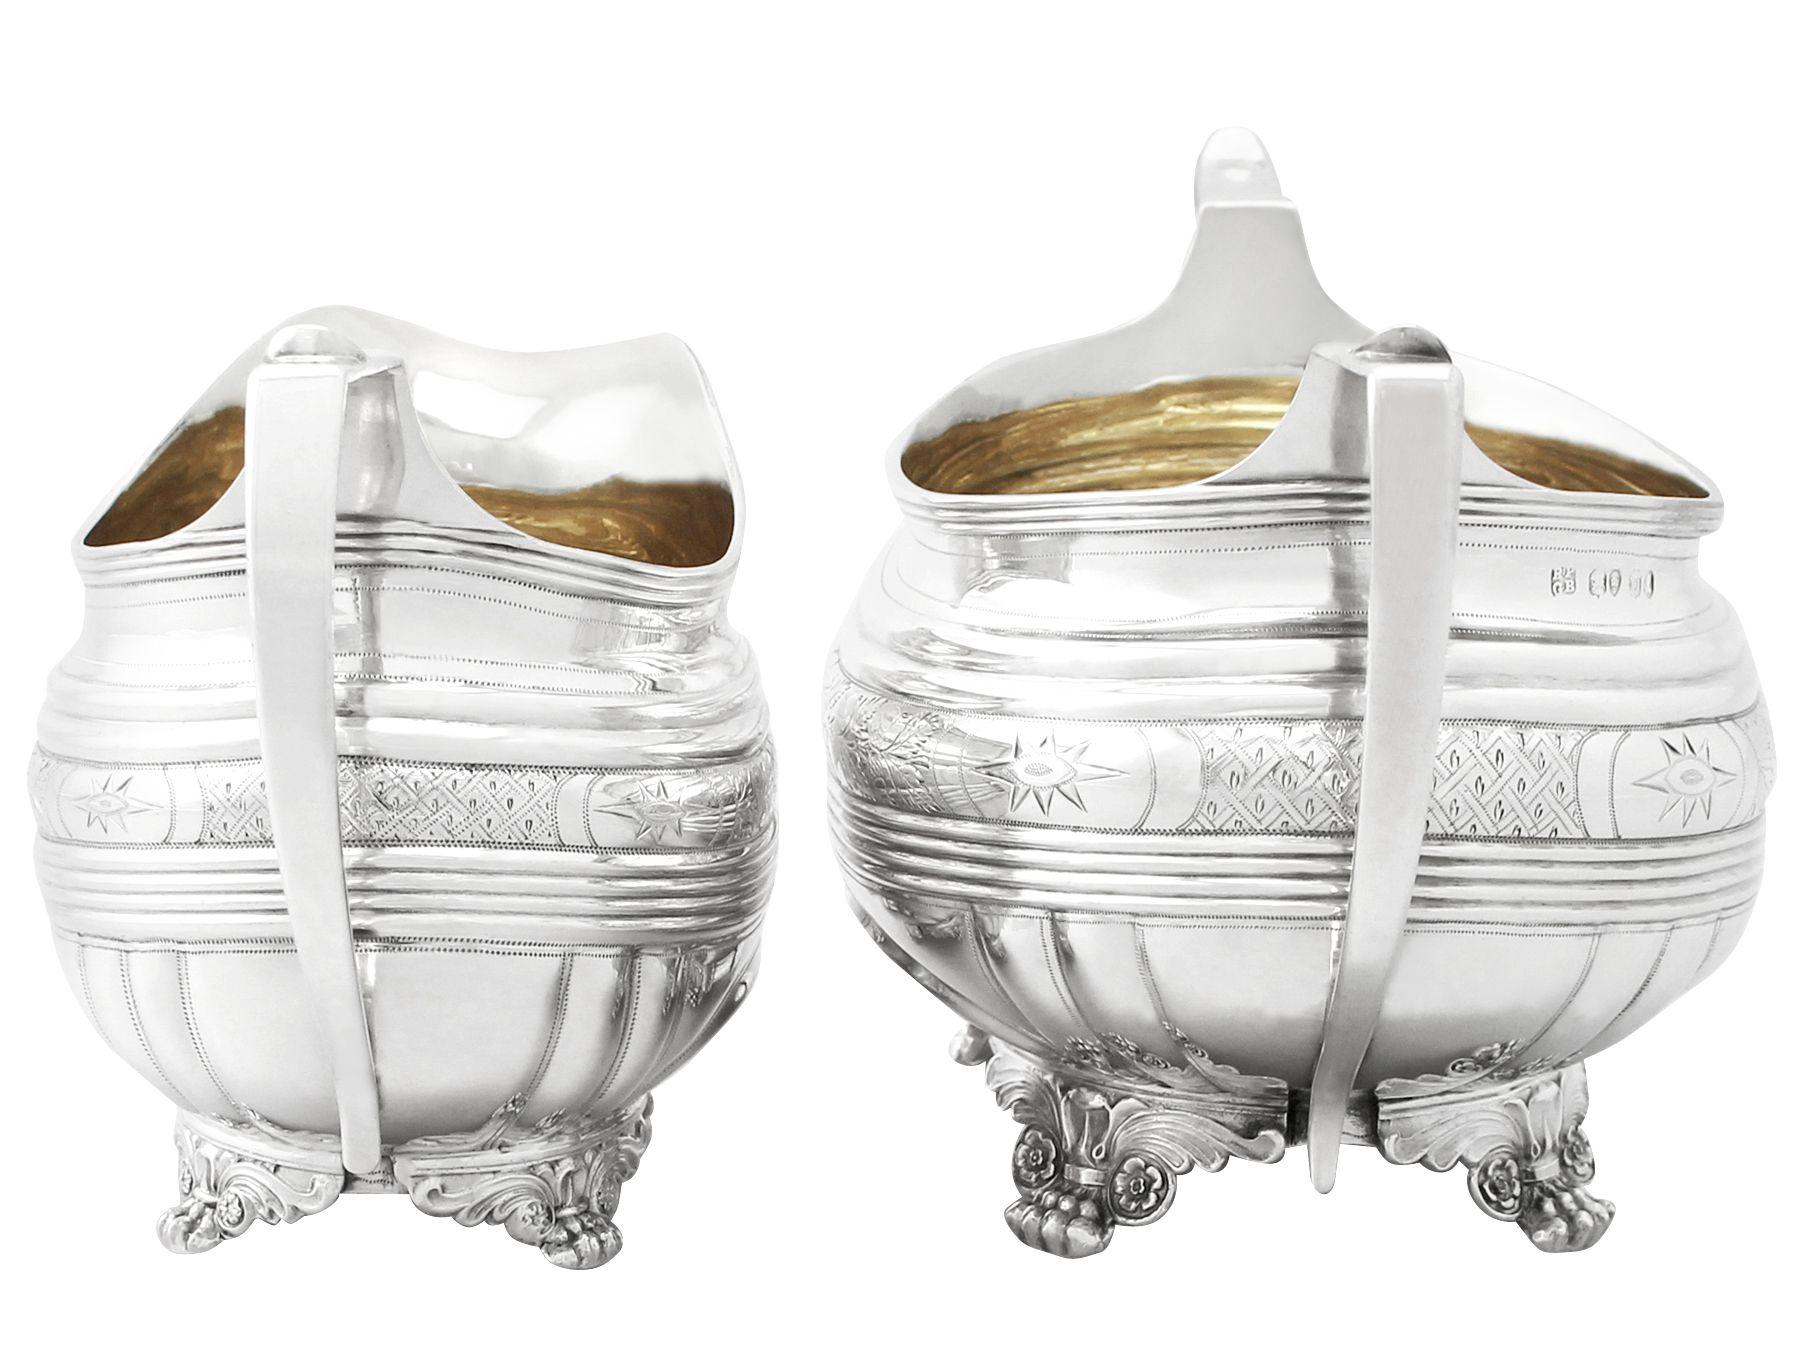 Great Britain (UK) Antique George IV English Sterling Silver Cream Jug or Creamer and Sugar Bowl